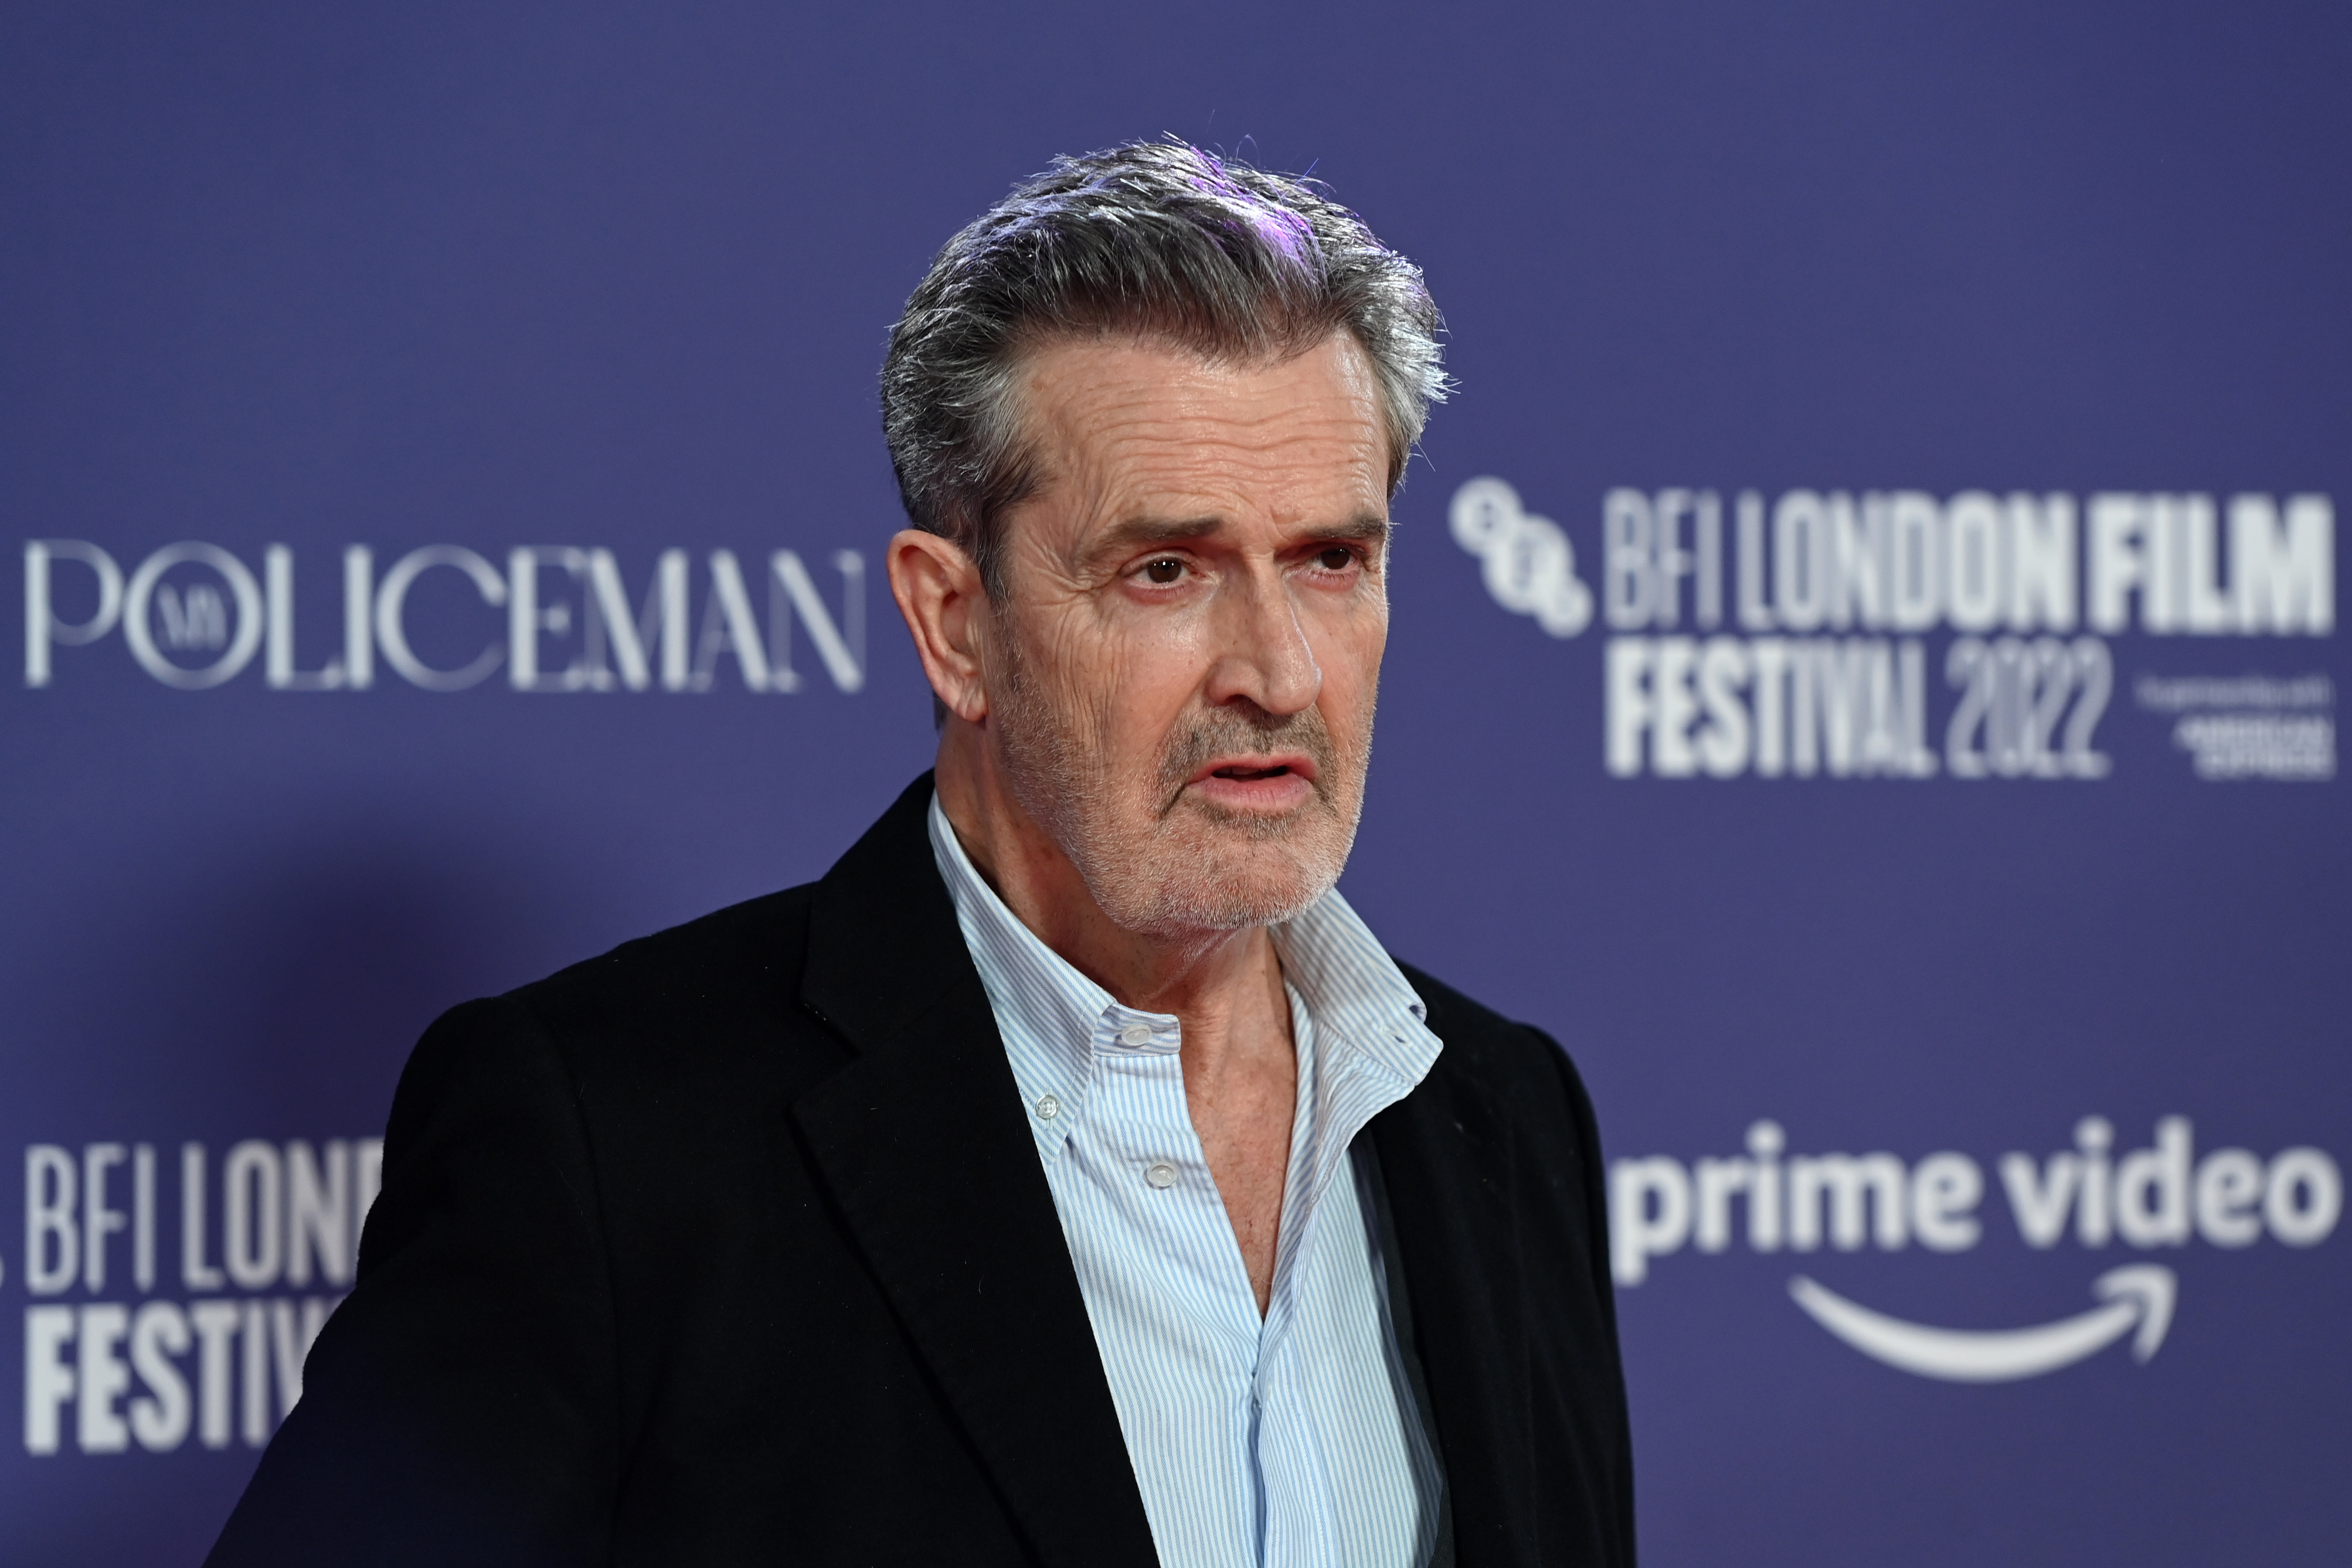 Rupert Everett at The Royal Festival Hall on October 15, 2022, in London, England. | Source: Getty Images